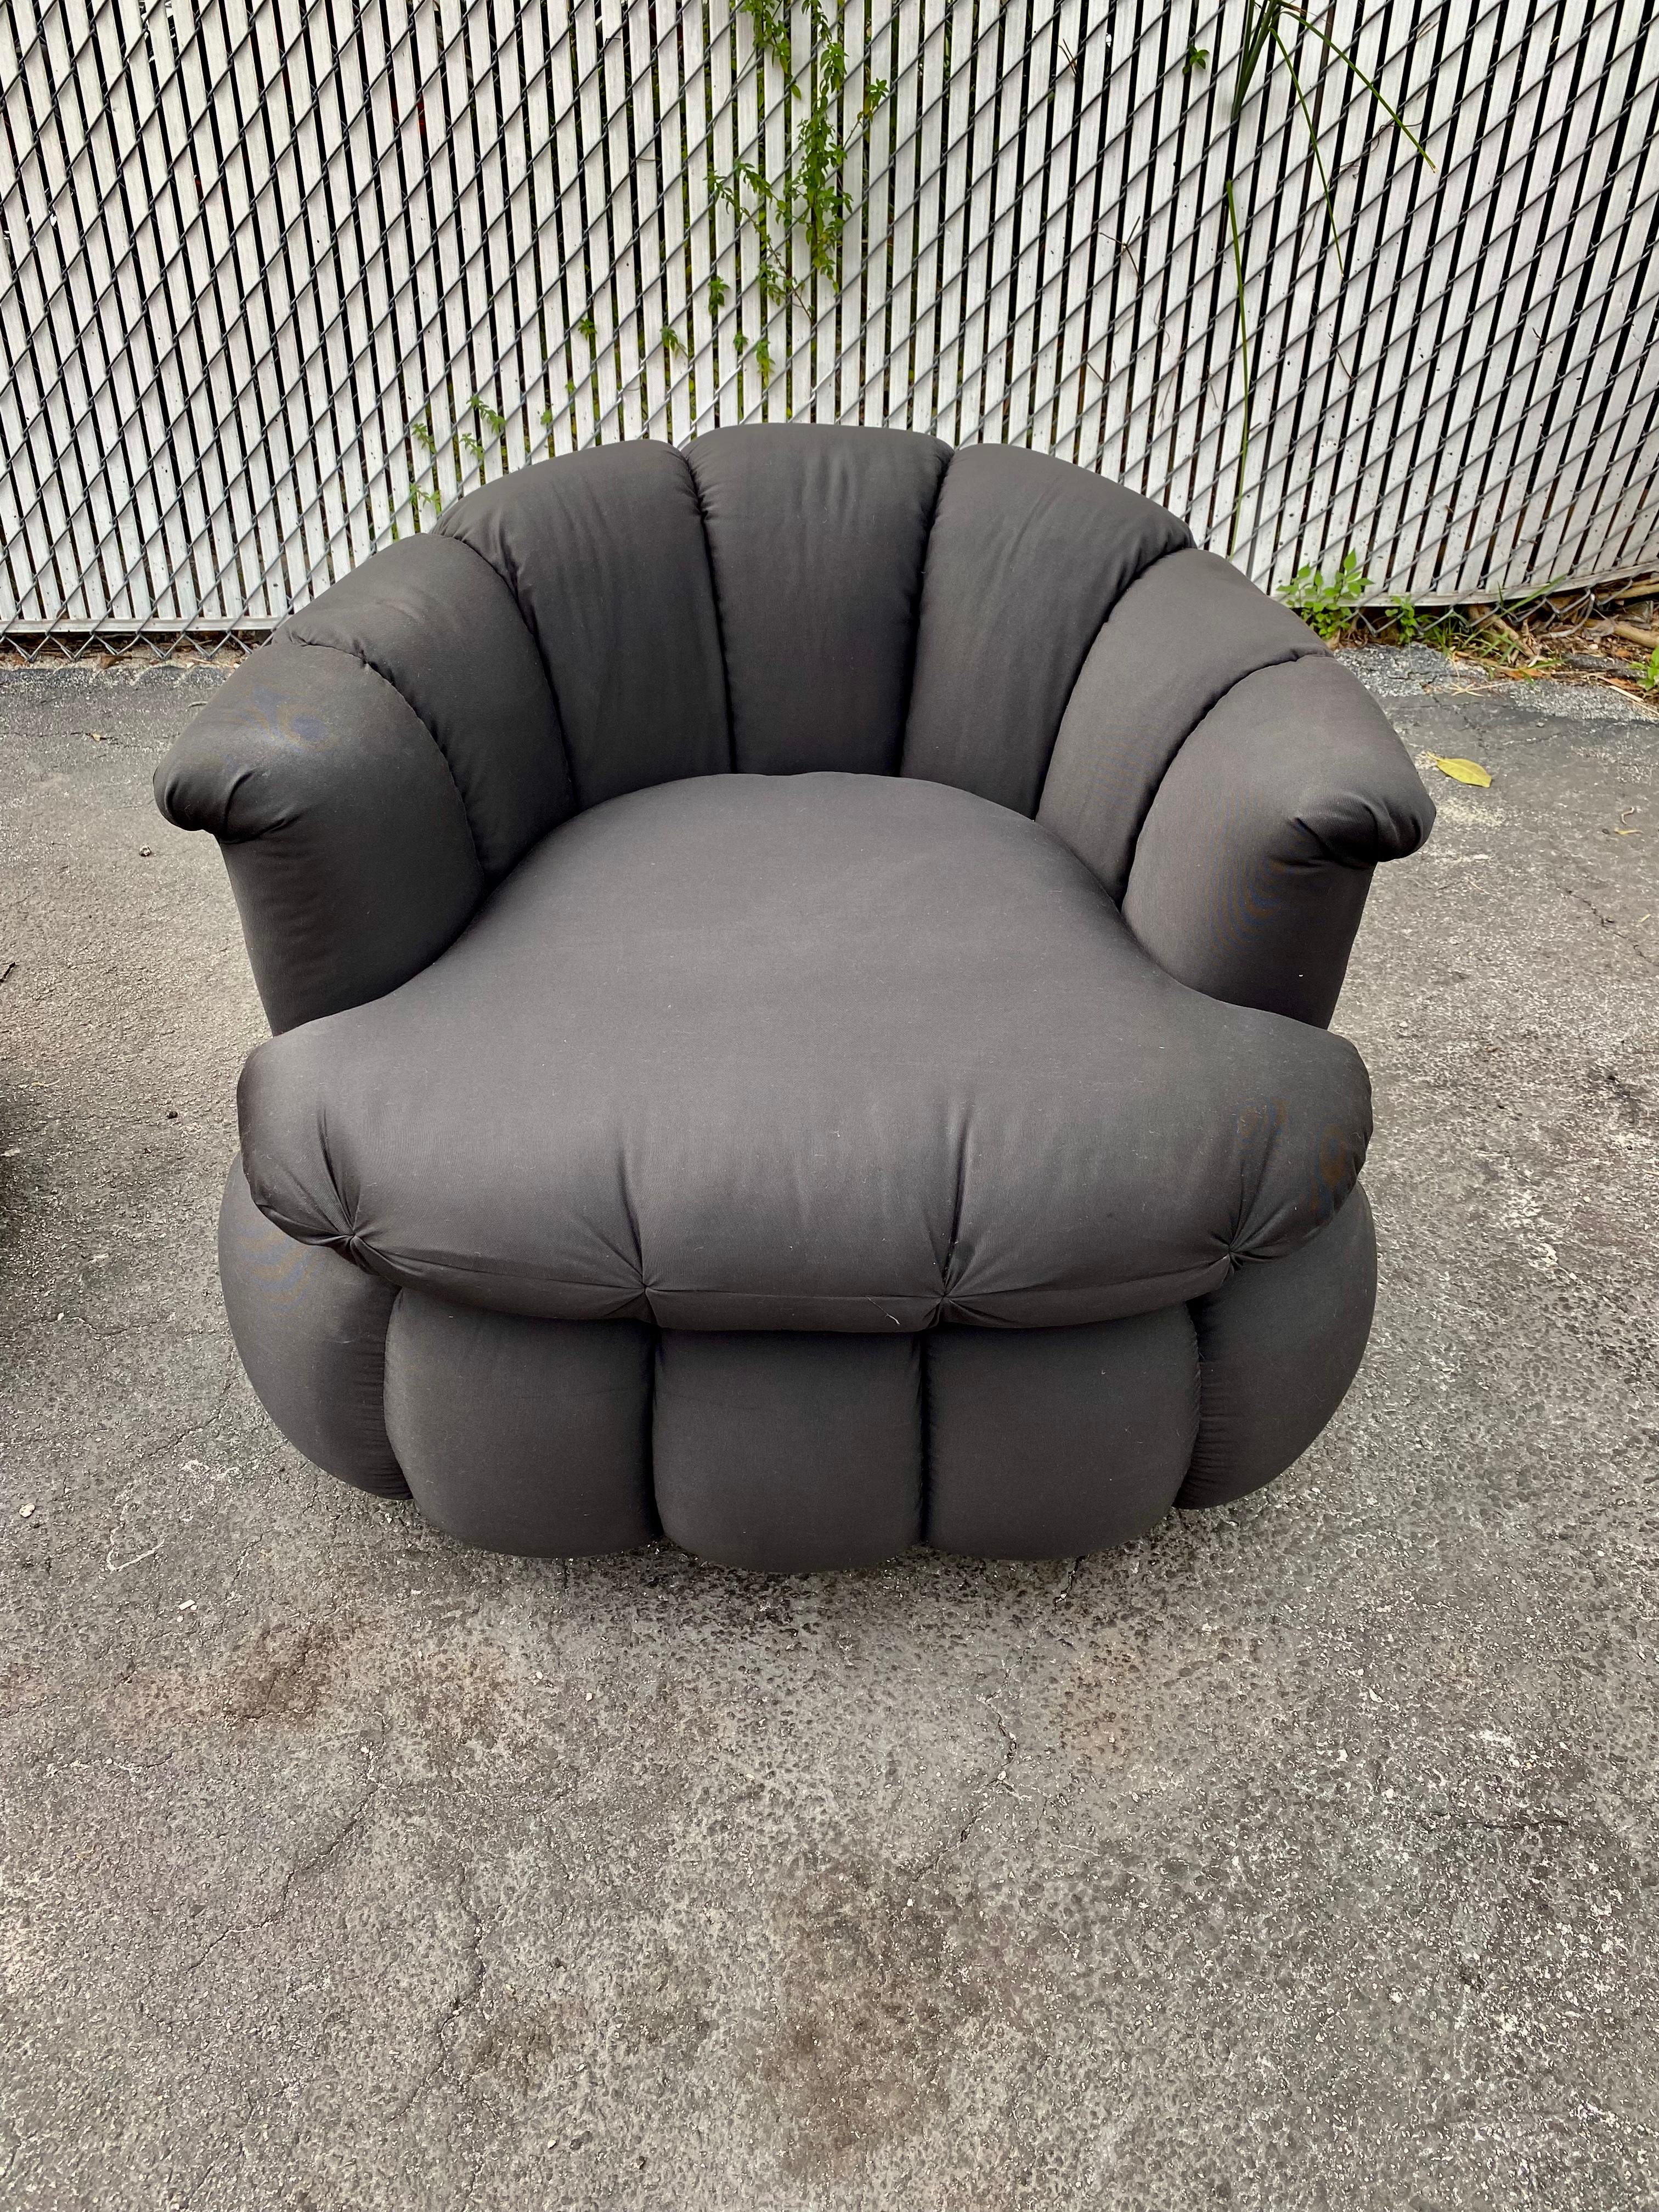 1980s Croissant Tufted Channeled Swivel Chairs, Set of 2 For Sale 1